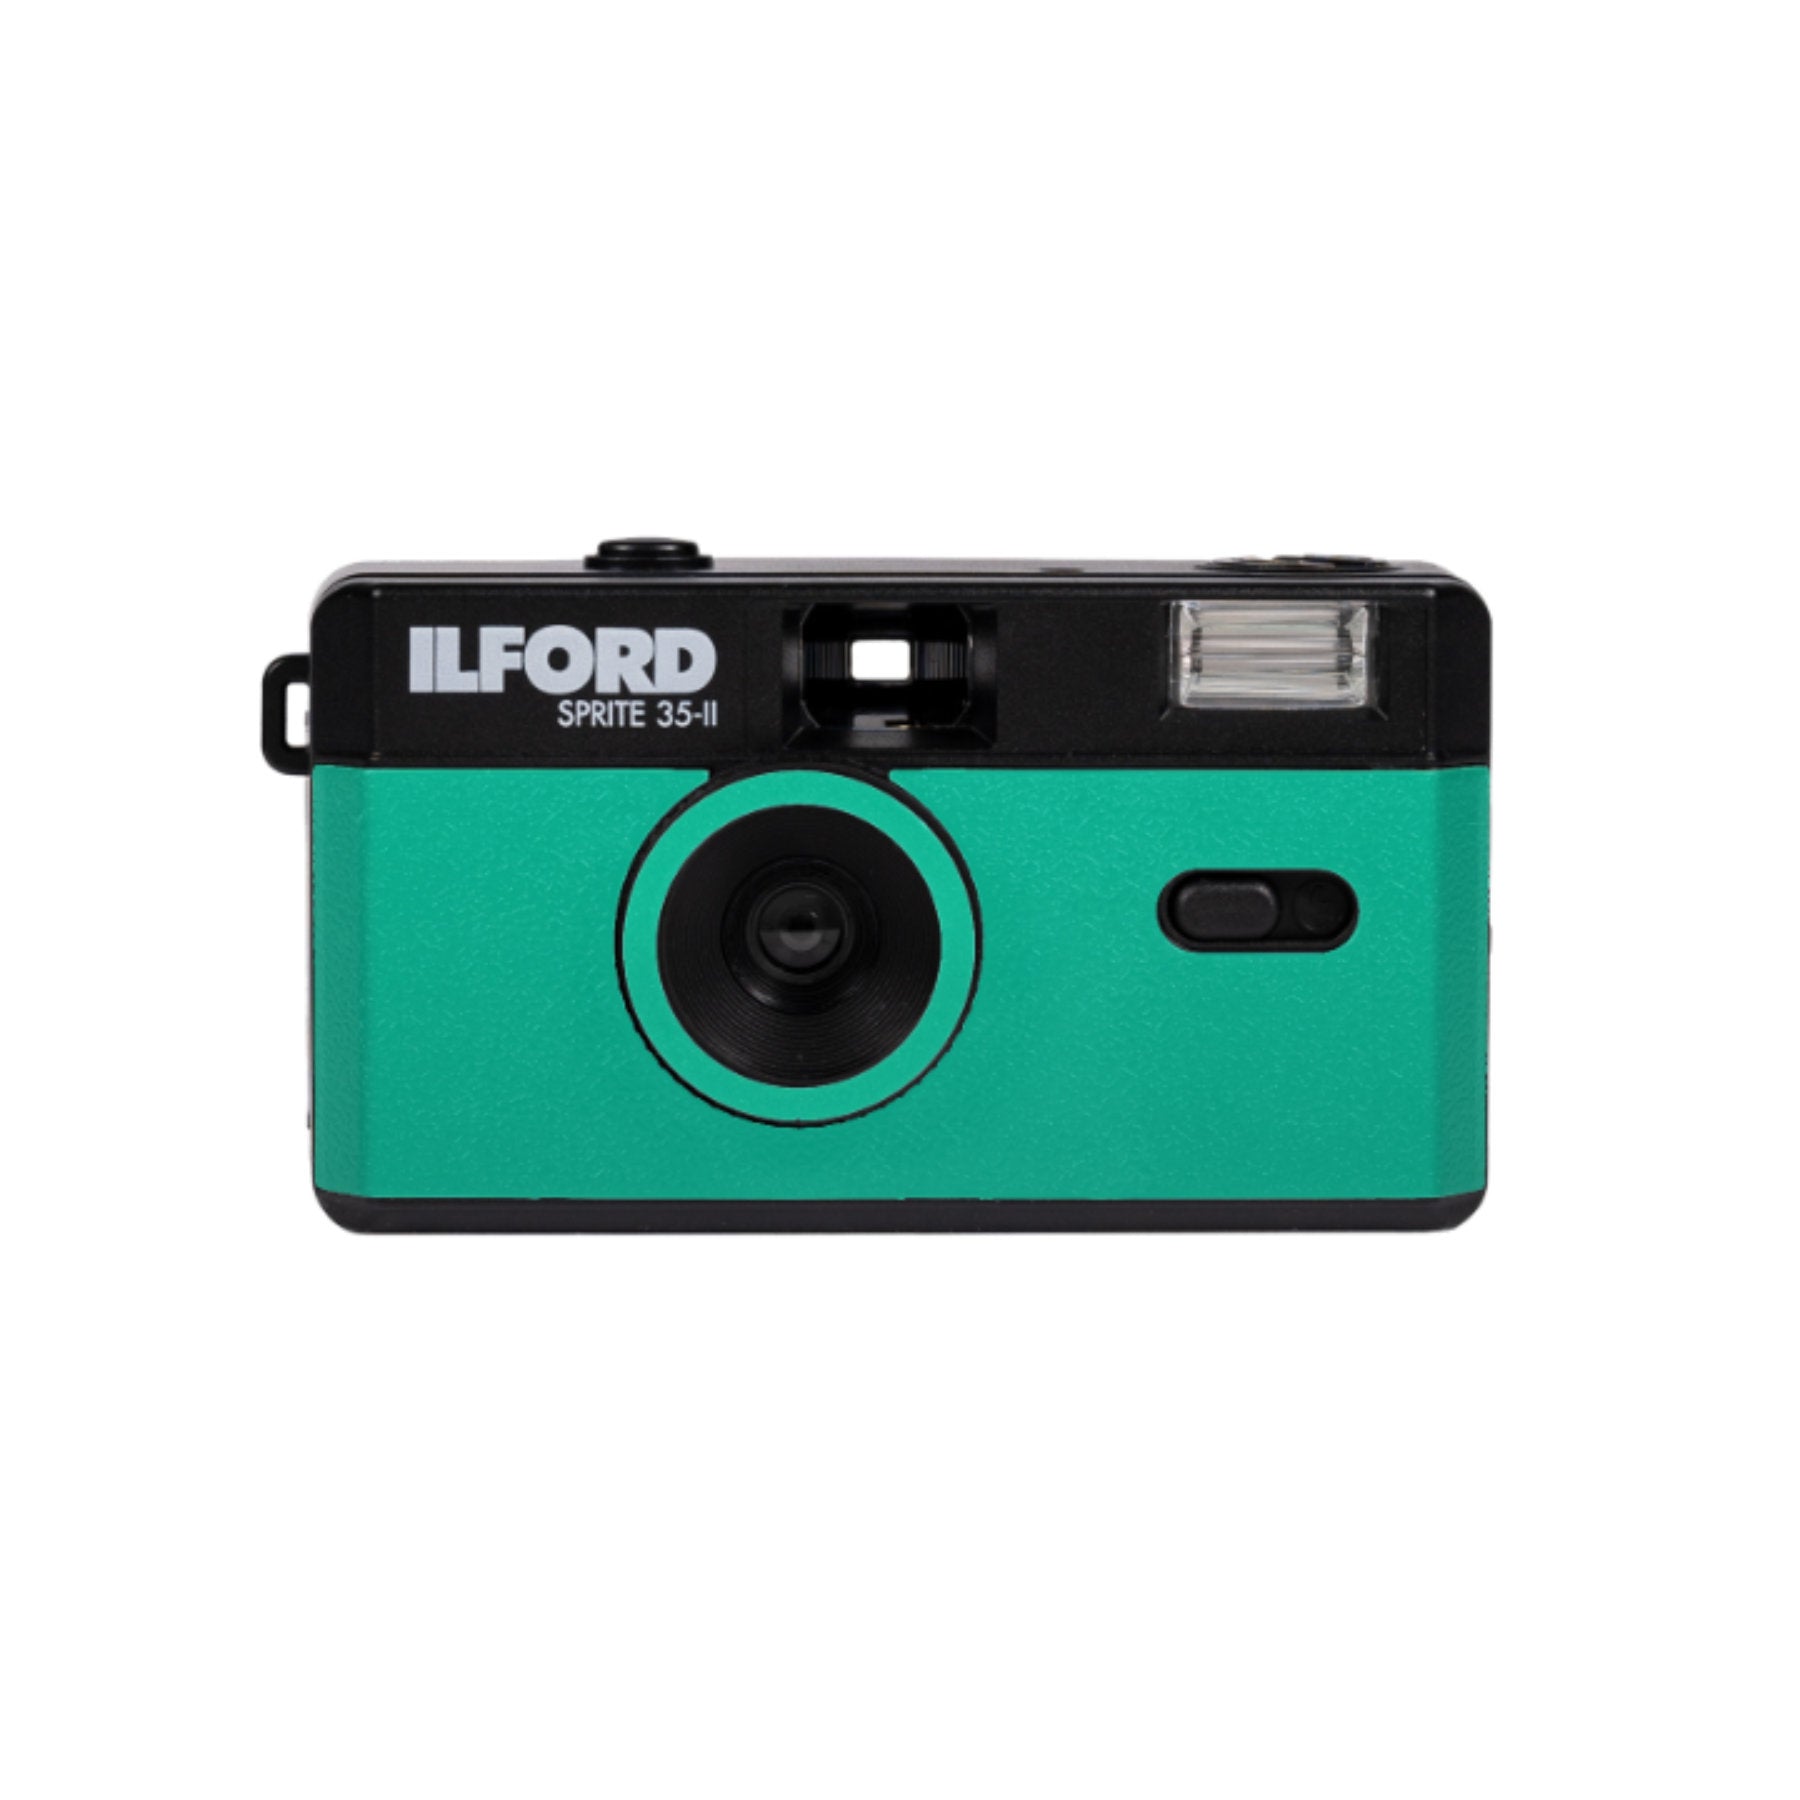 Buy ILFORD SPRITE 35-II reusable film camera - black & teal at Topic Store